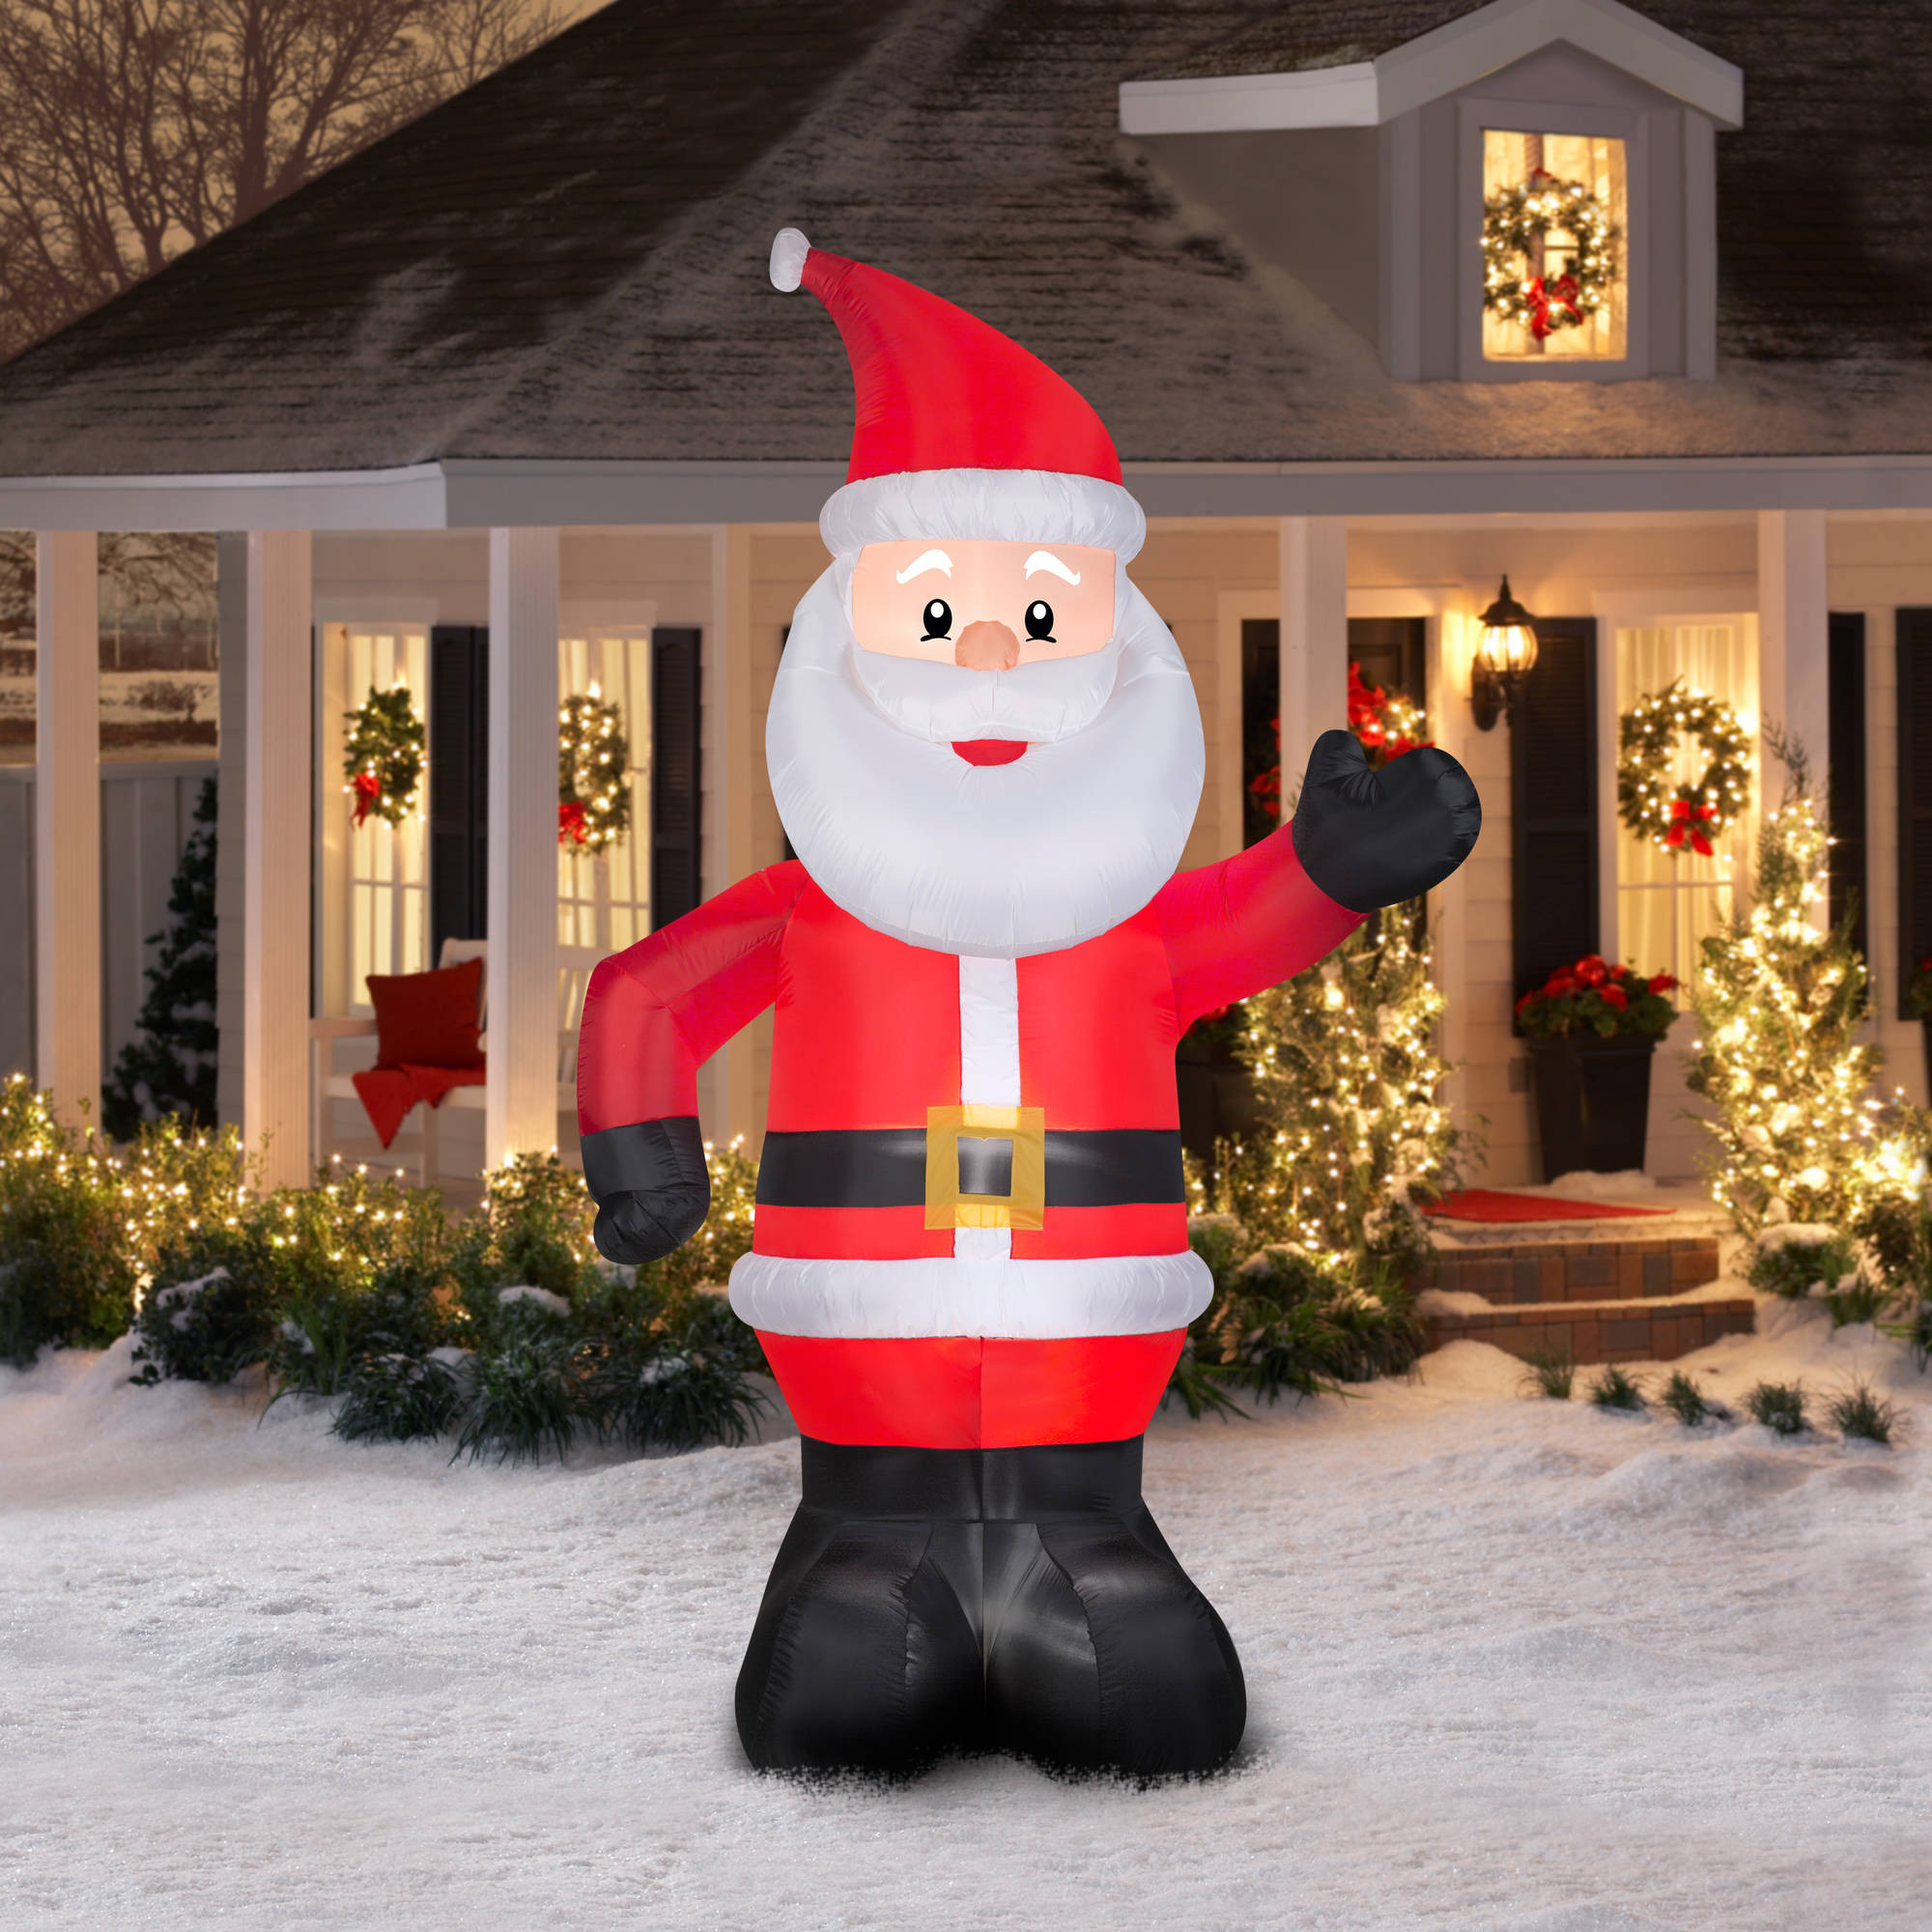 Outdoor Christmas Inflatables
 Gemmy Airblown Christmas Inflatables 10 Santa Walmart